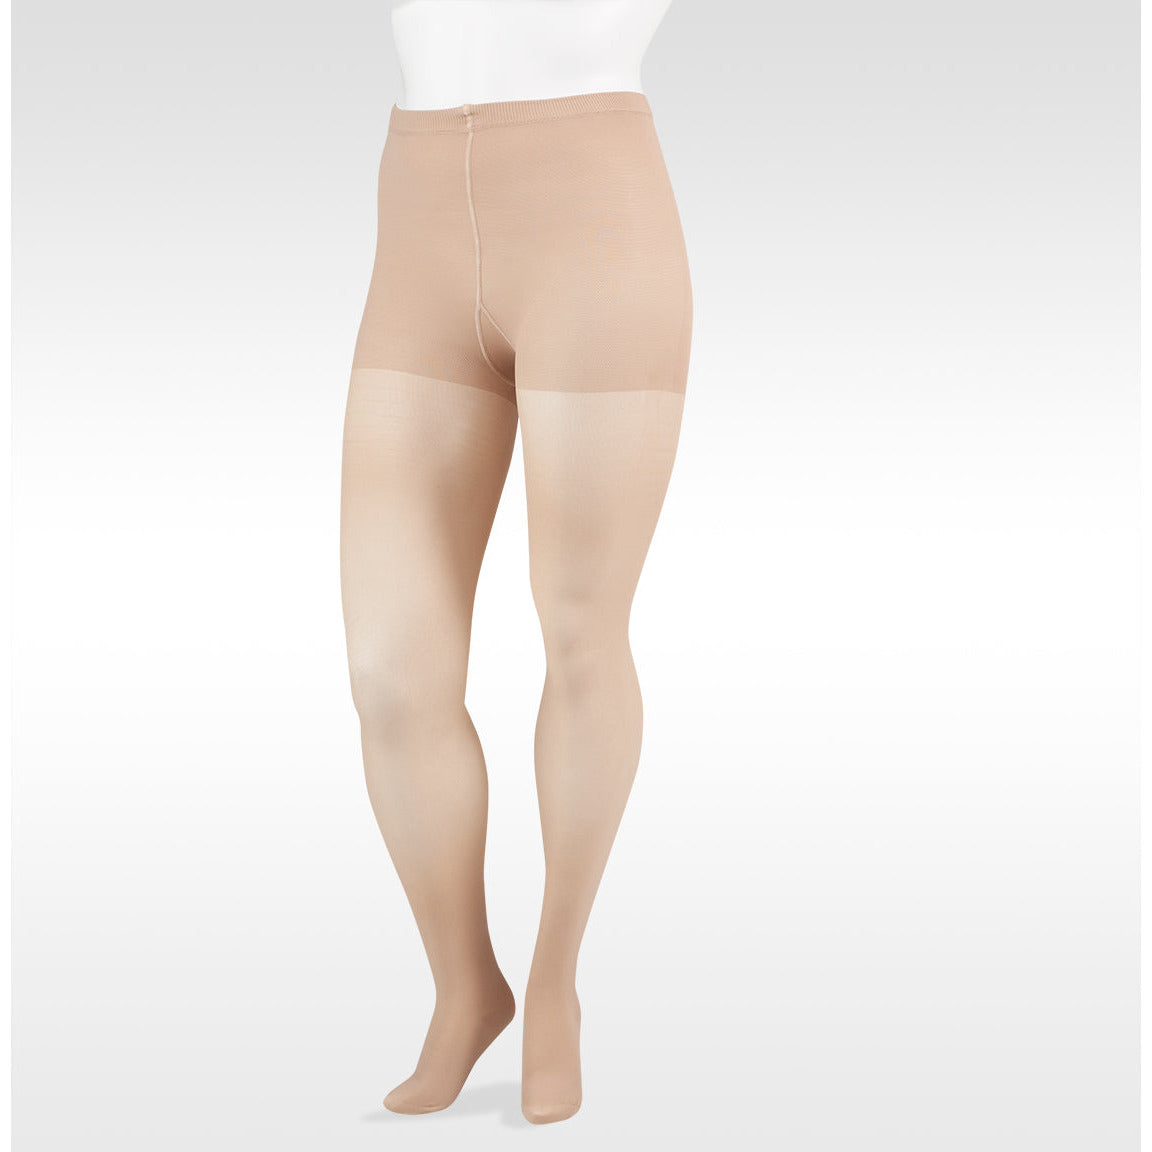 Juzo Soft 2082 Support Pantyhose with Elastic Panty 30-40mmHg